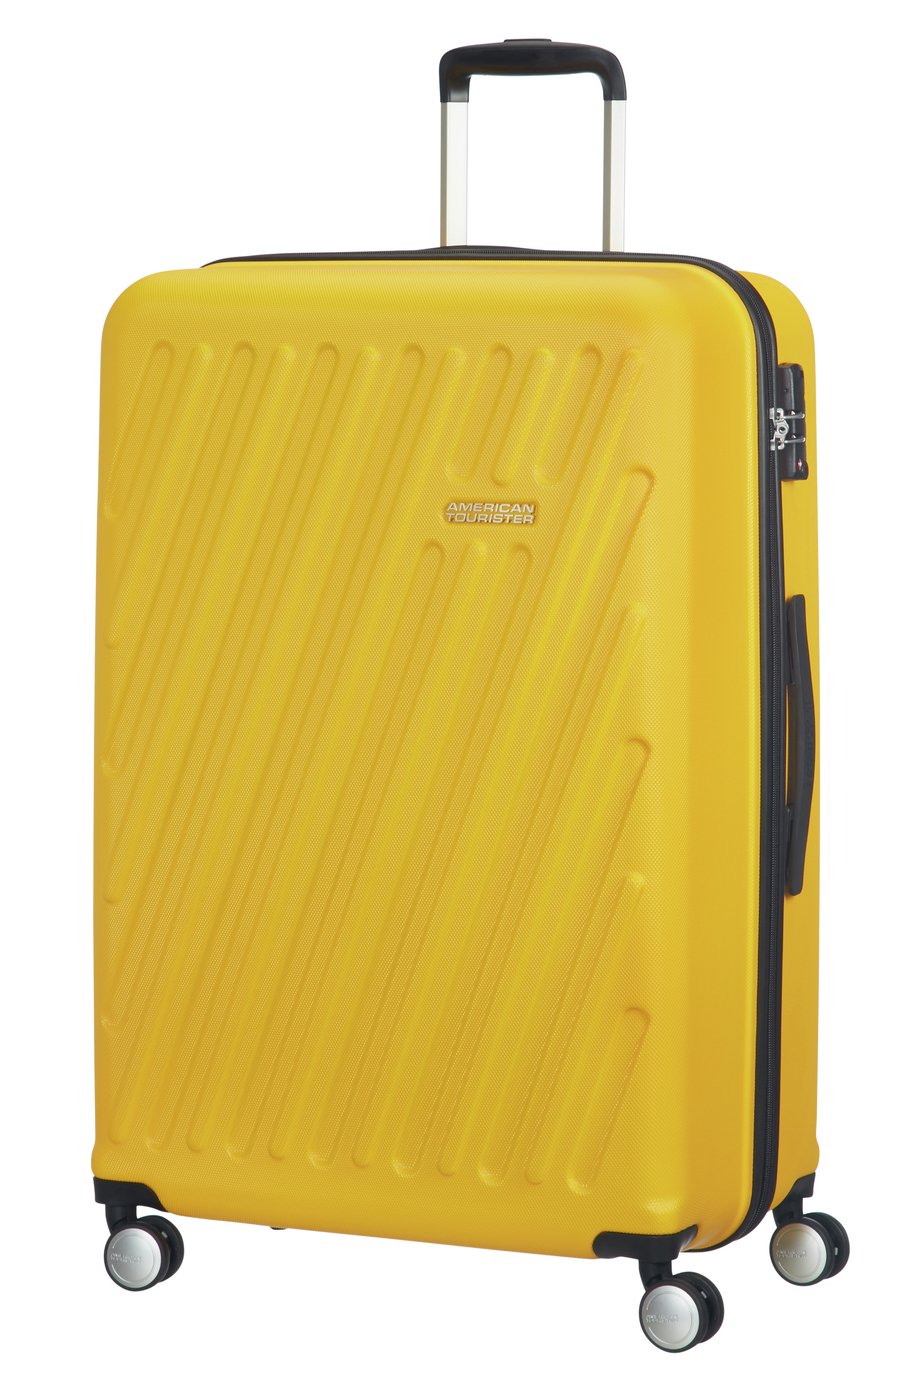 American Tourister Hypercube Large Yellow Suitcase Review